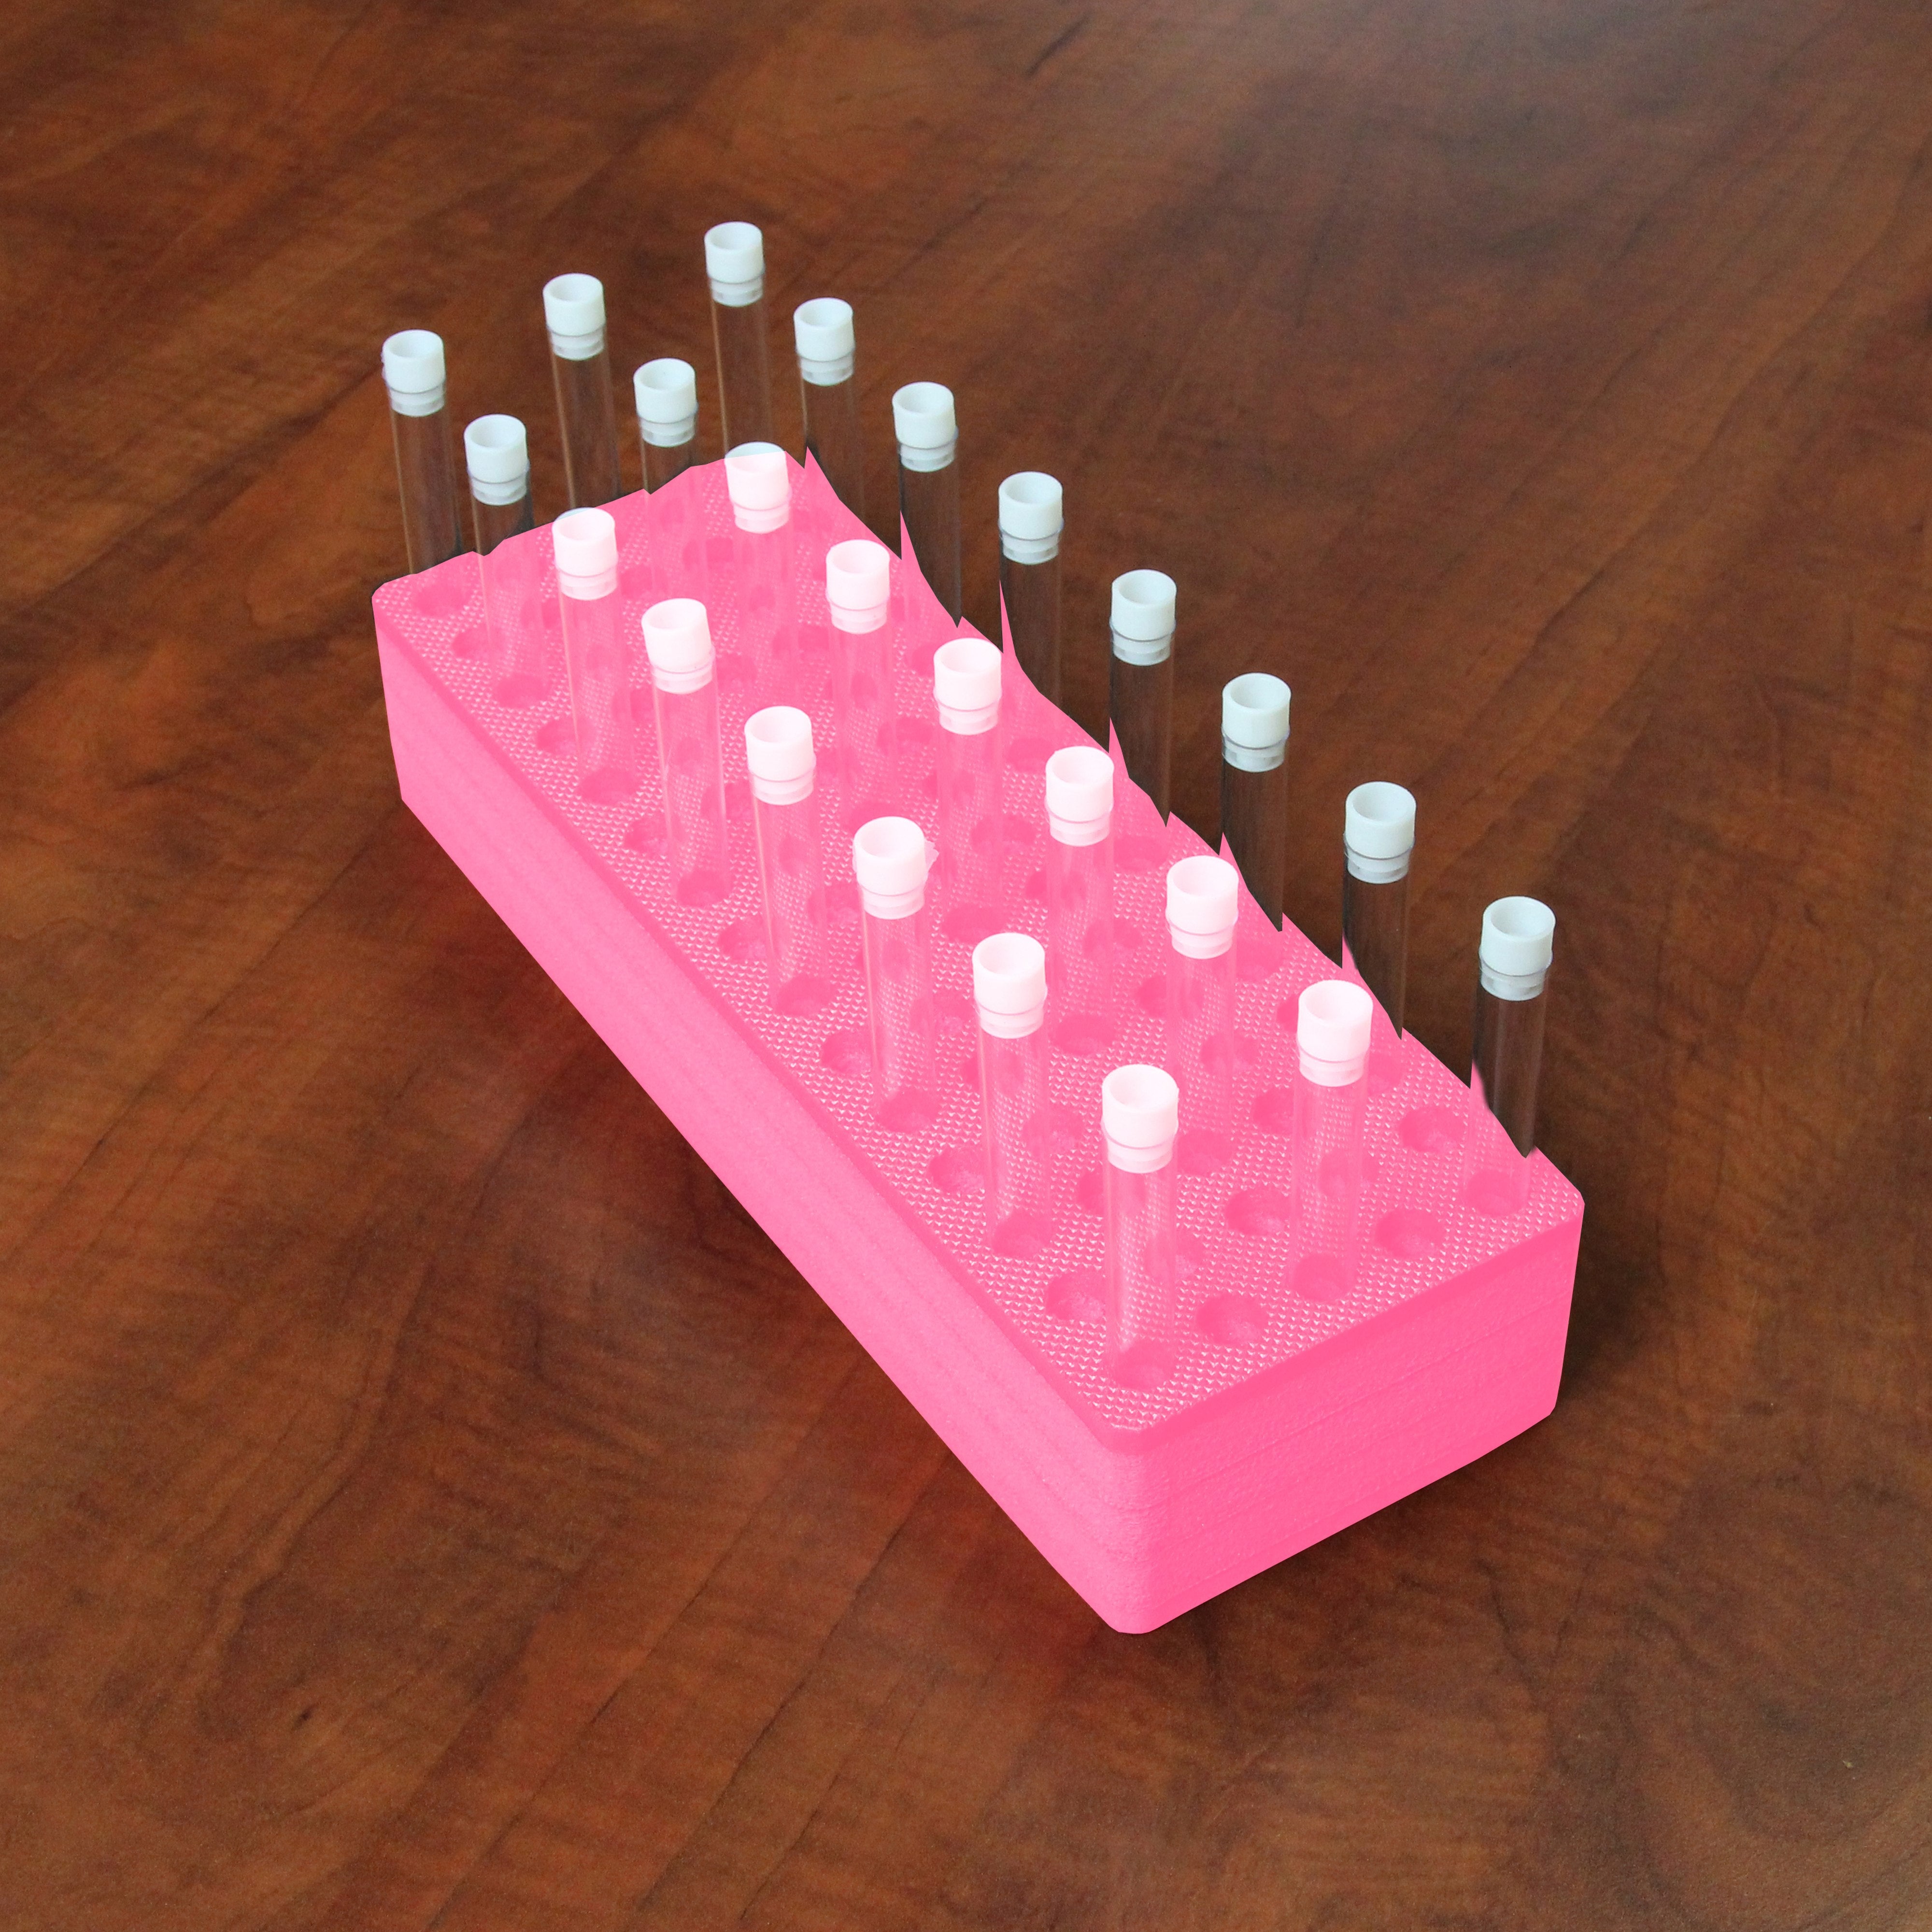 Polar Whale Test Tube Organizer Pink Foam Storage Rack Stand Transport Holds 75 Tubes Fits up to 13mm Diameter Tubes